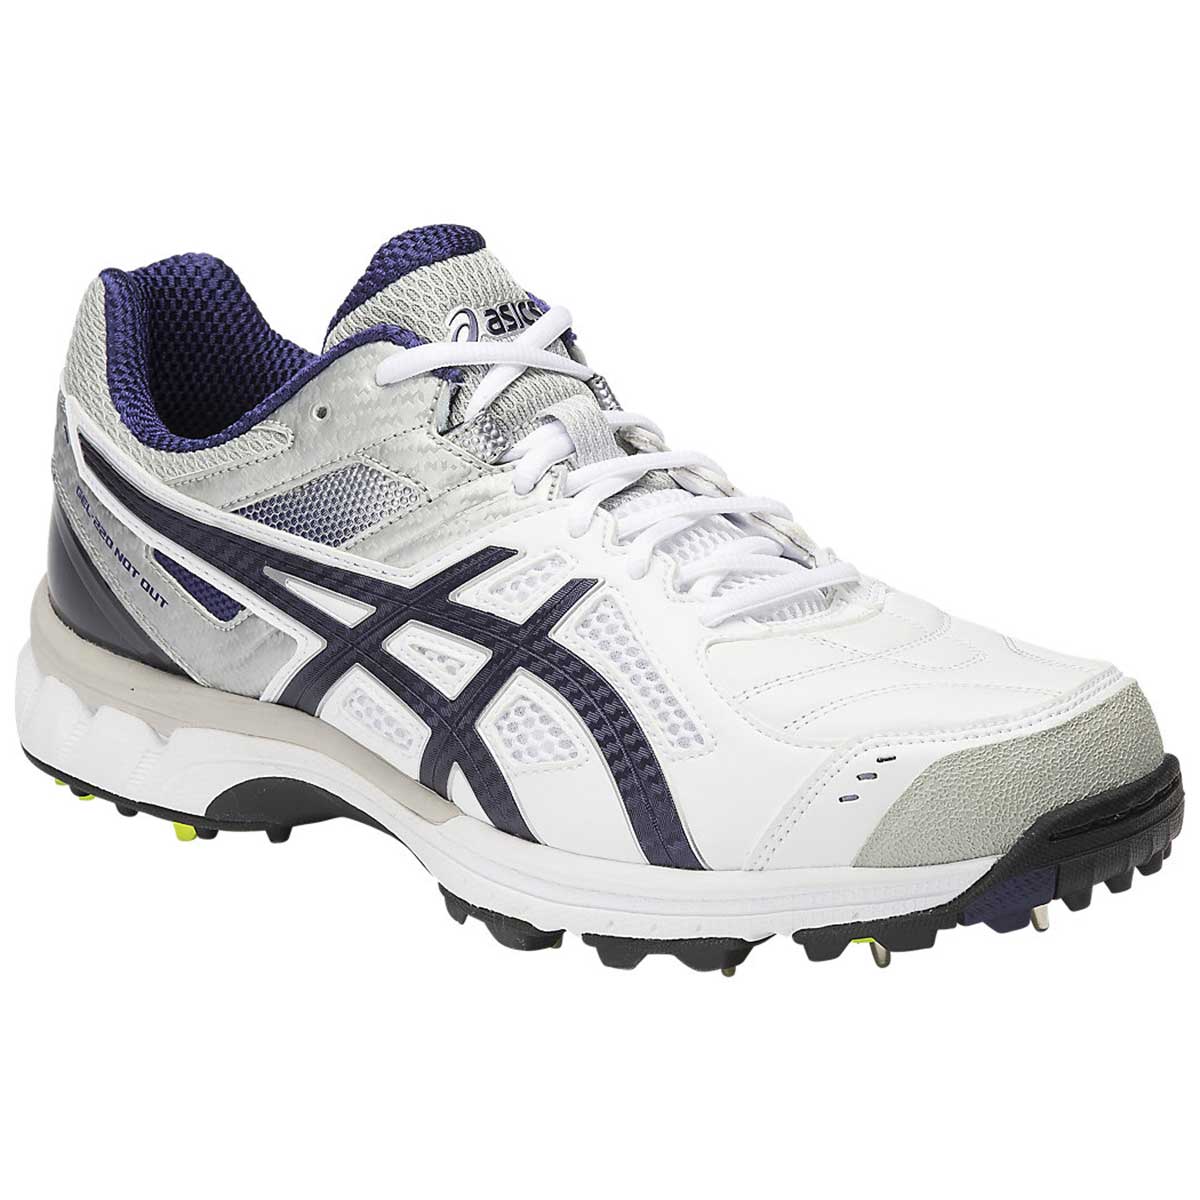 asics 220 not out cricket shoes, OFF 71 